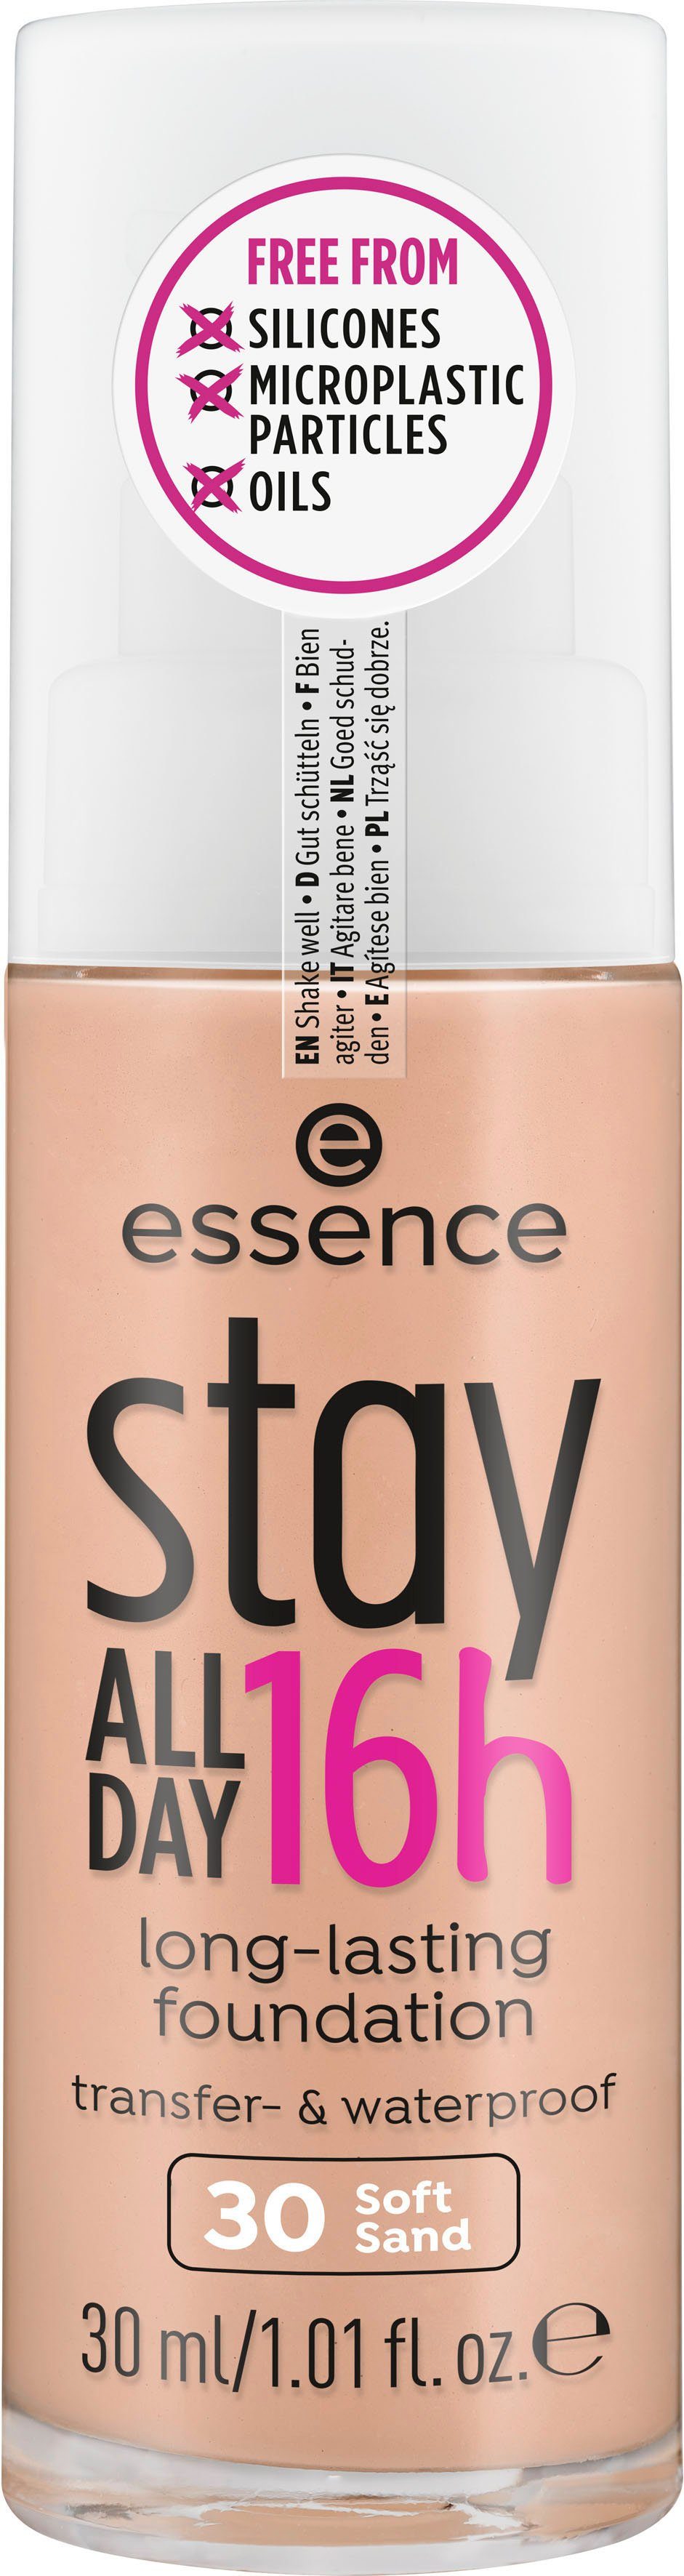 Foundation stay DAY Essence Sand long-lasting, Soft 3-tlg. ALL 16h